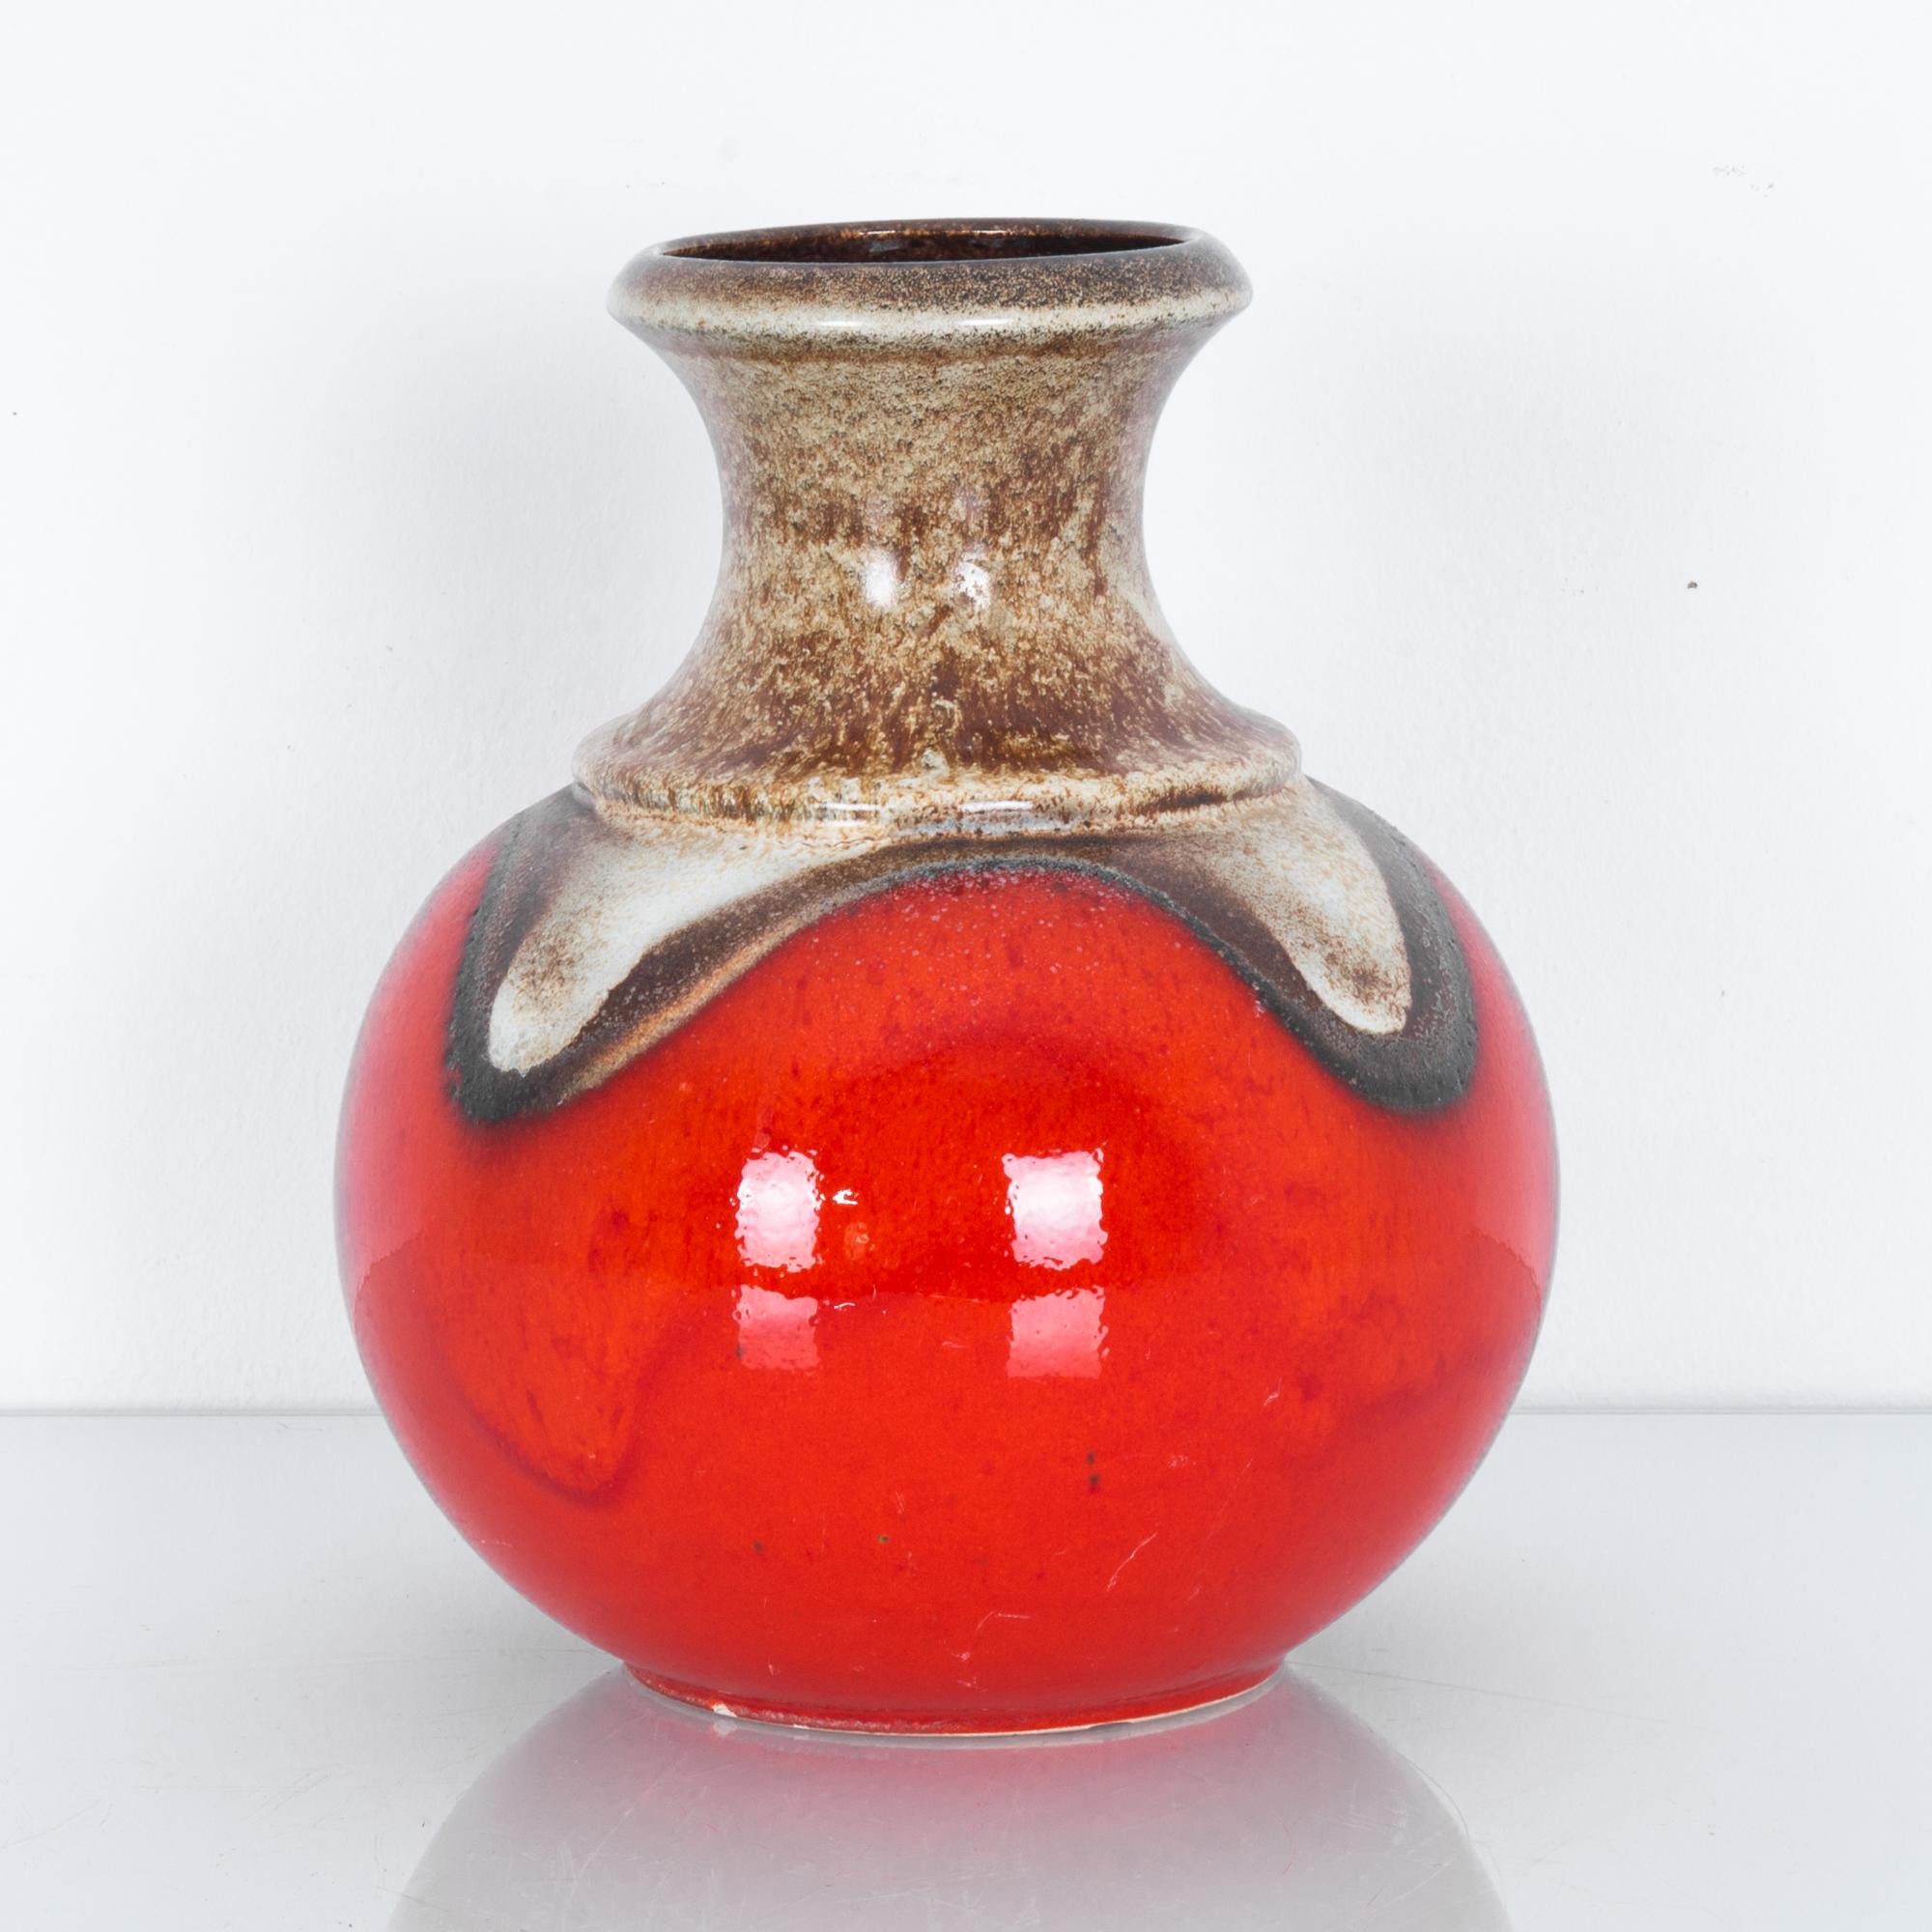 A graphic patterned vase from Germany, circa 1950. Glazed in brown and red, these characteristic mid-20th century ceramics were produced in West Germany by a range of makers. High quality stoneware, with graphic midcentury color schemes and